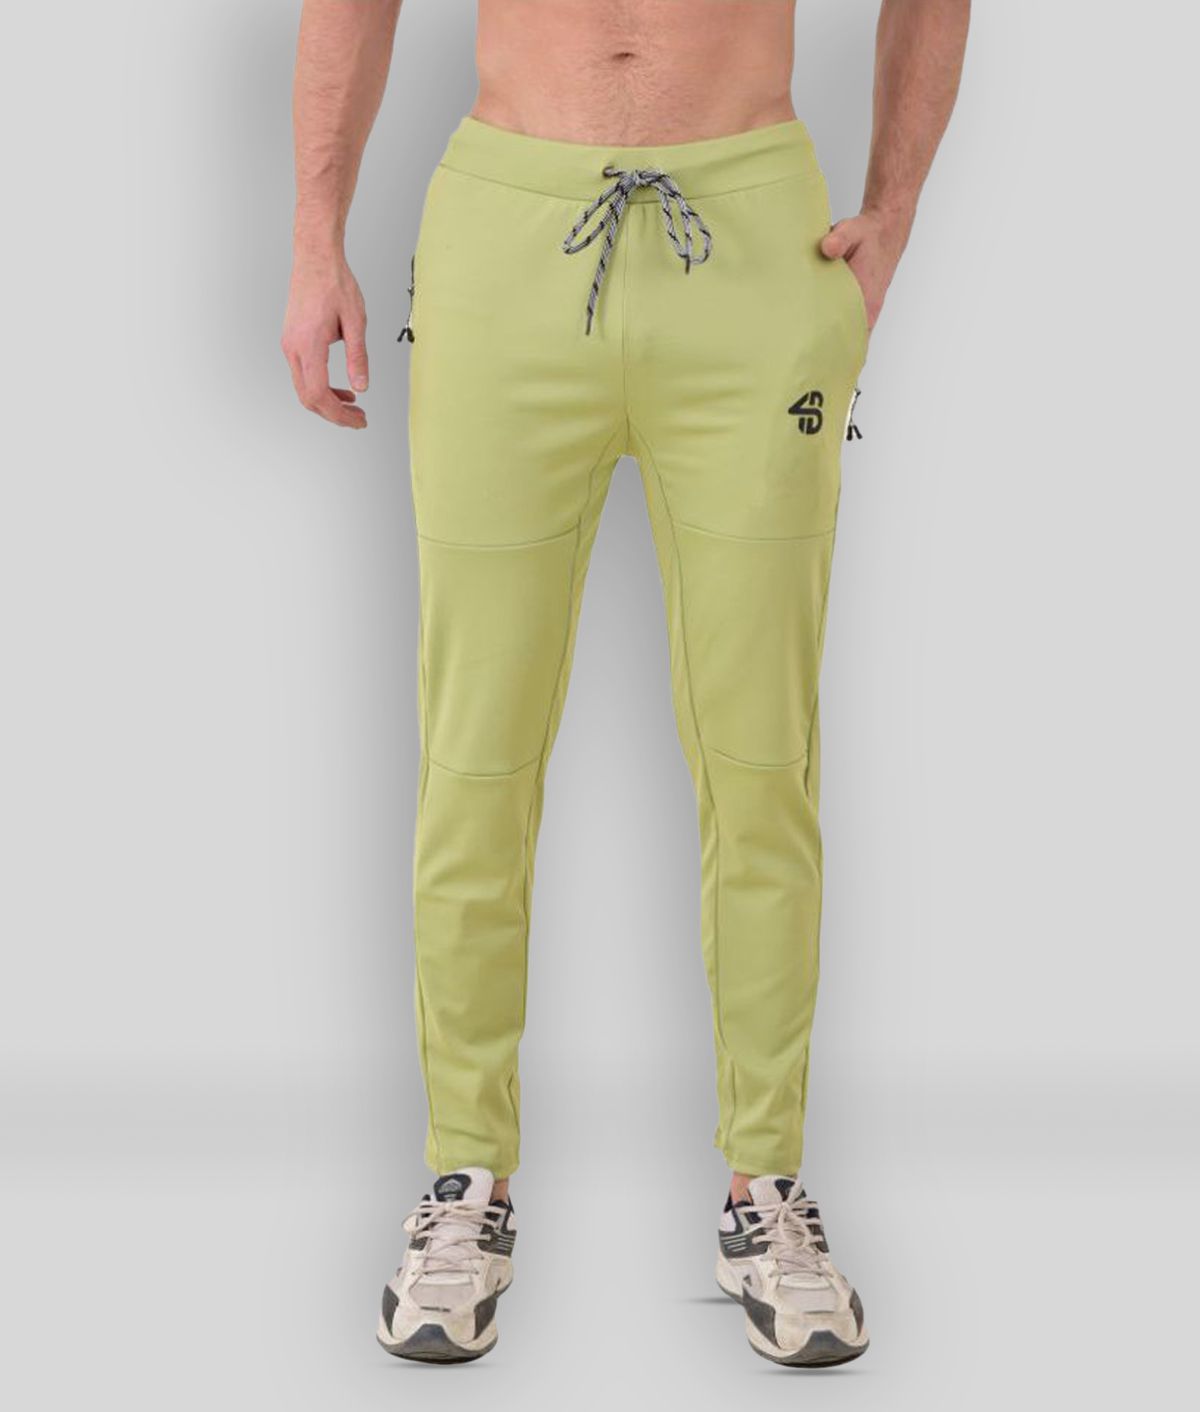 Forbro - Lime Green Polyester Blend Men's Trackpants ( Pack of 1 )